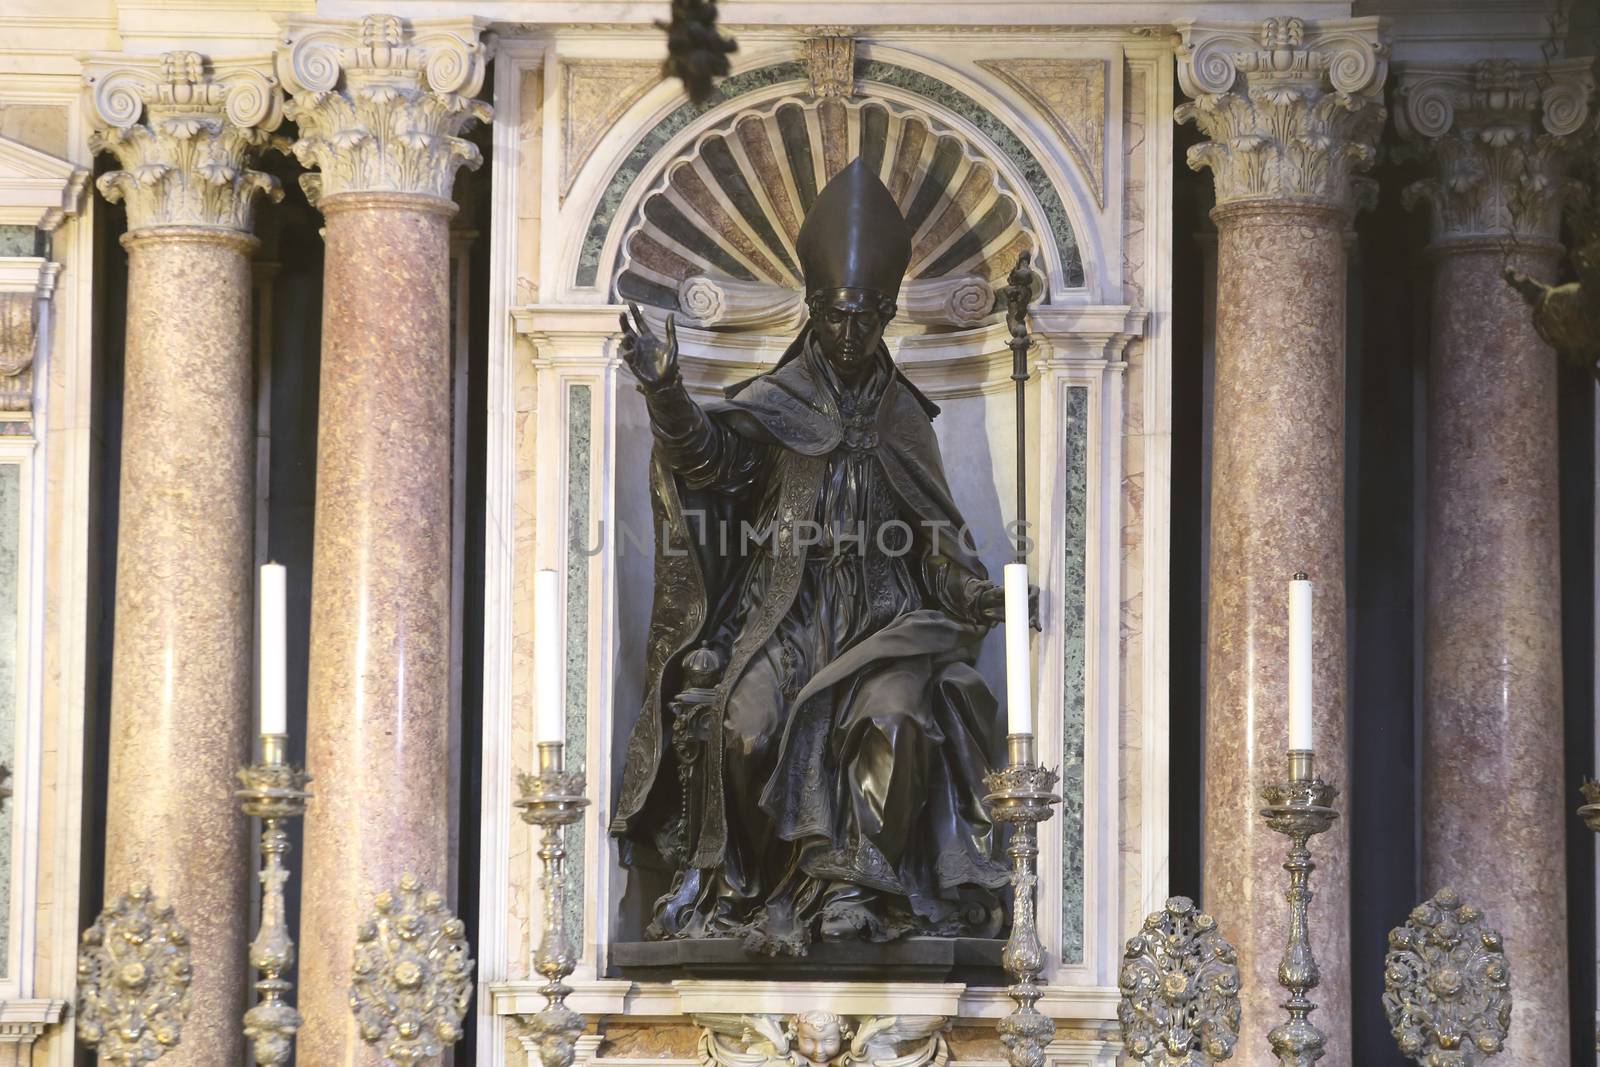 Naples, Italy - September 16, 2019: The Chapel of the Treasure of San Gennaro in the Cathedral of Naples